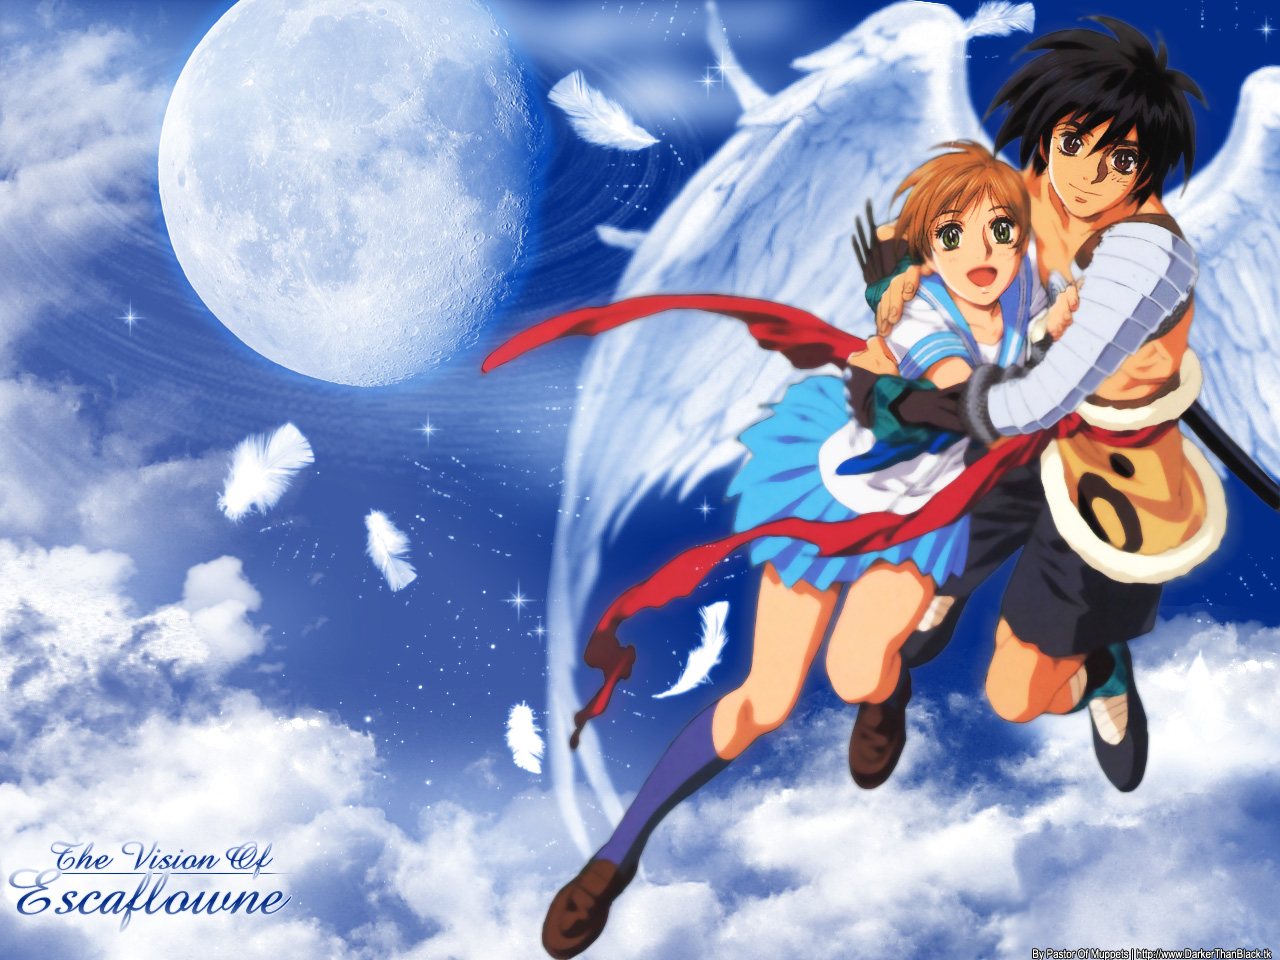 Check This Out Our New Escaflowne Wallpaper